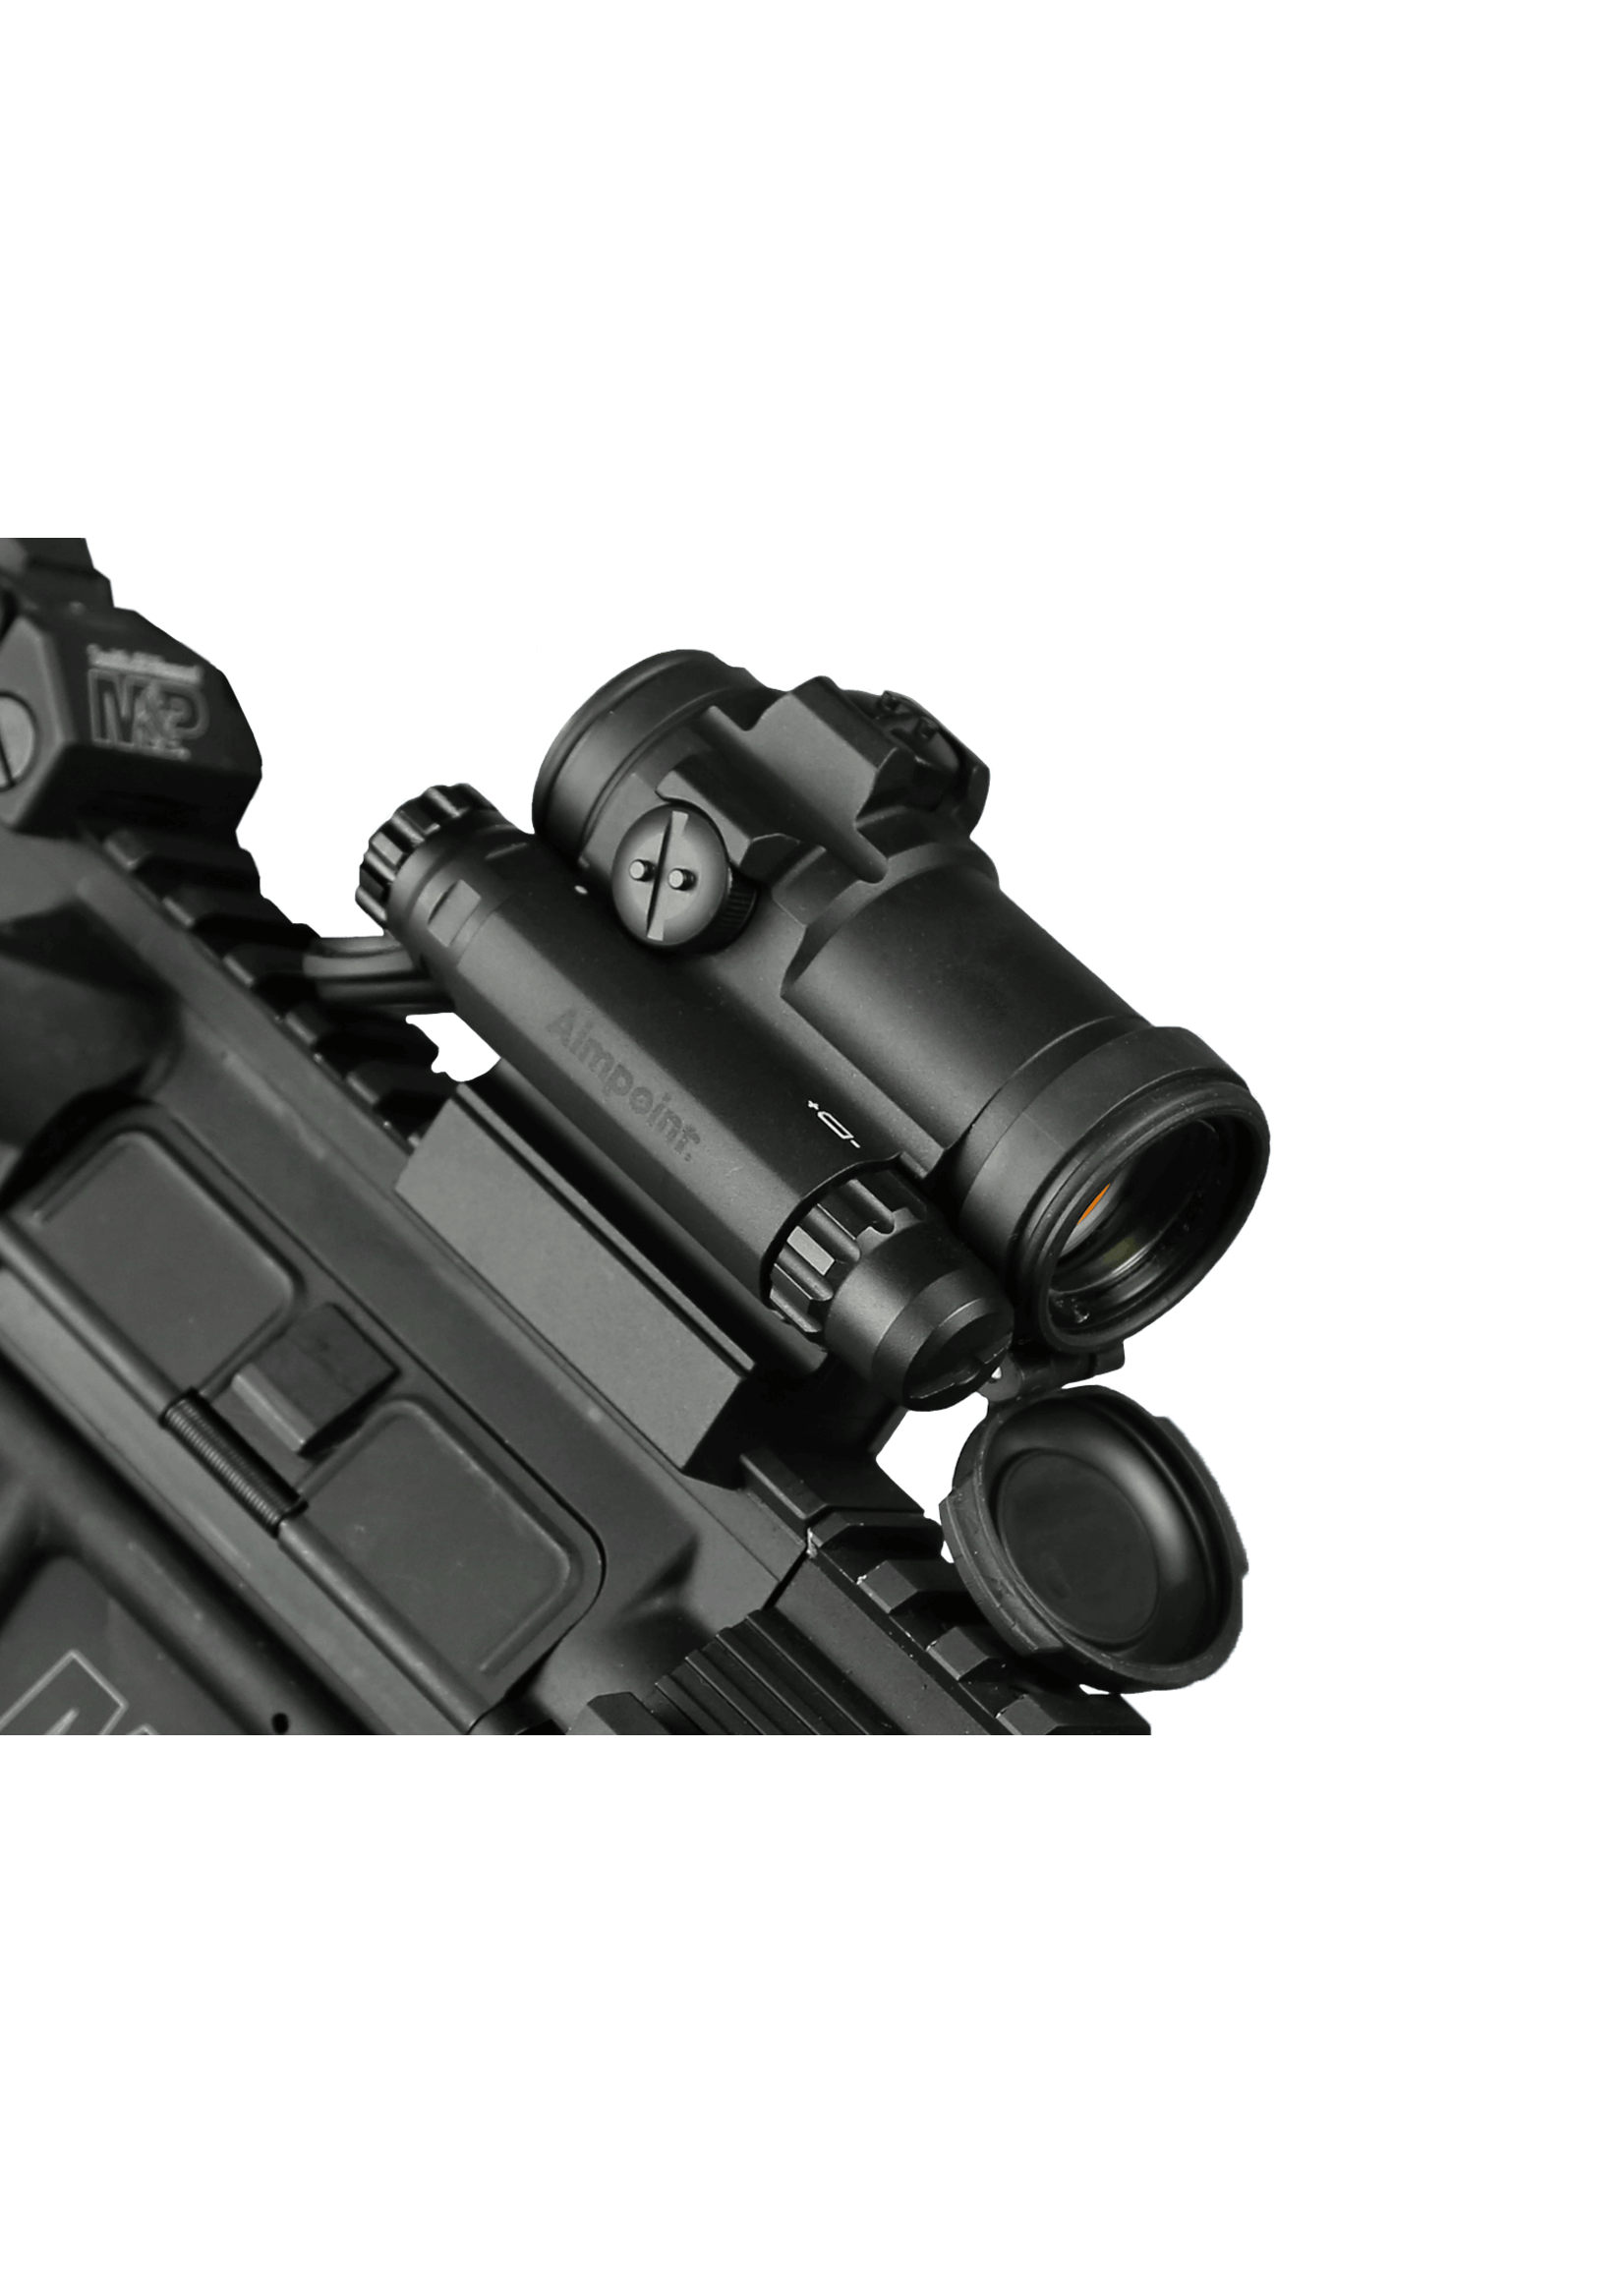 AIMPOINT COMPM5S RED DOT REFLEX SIGHT - AR15 READY